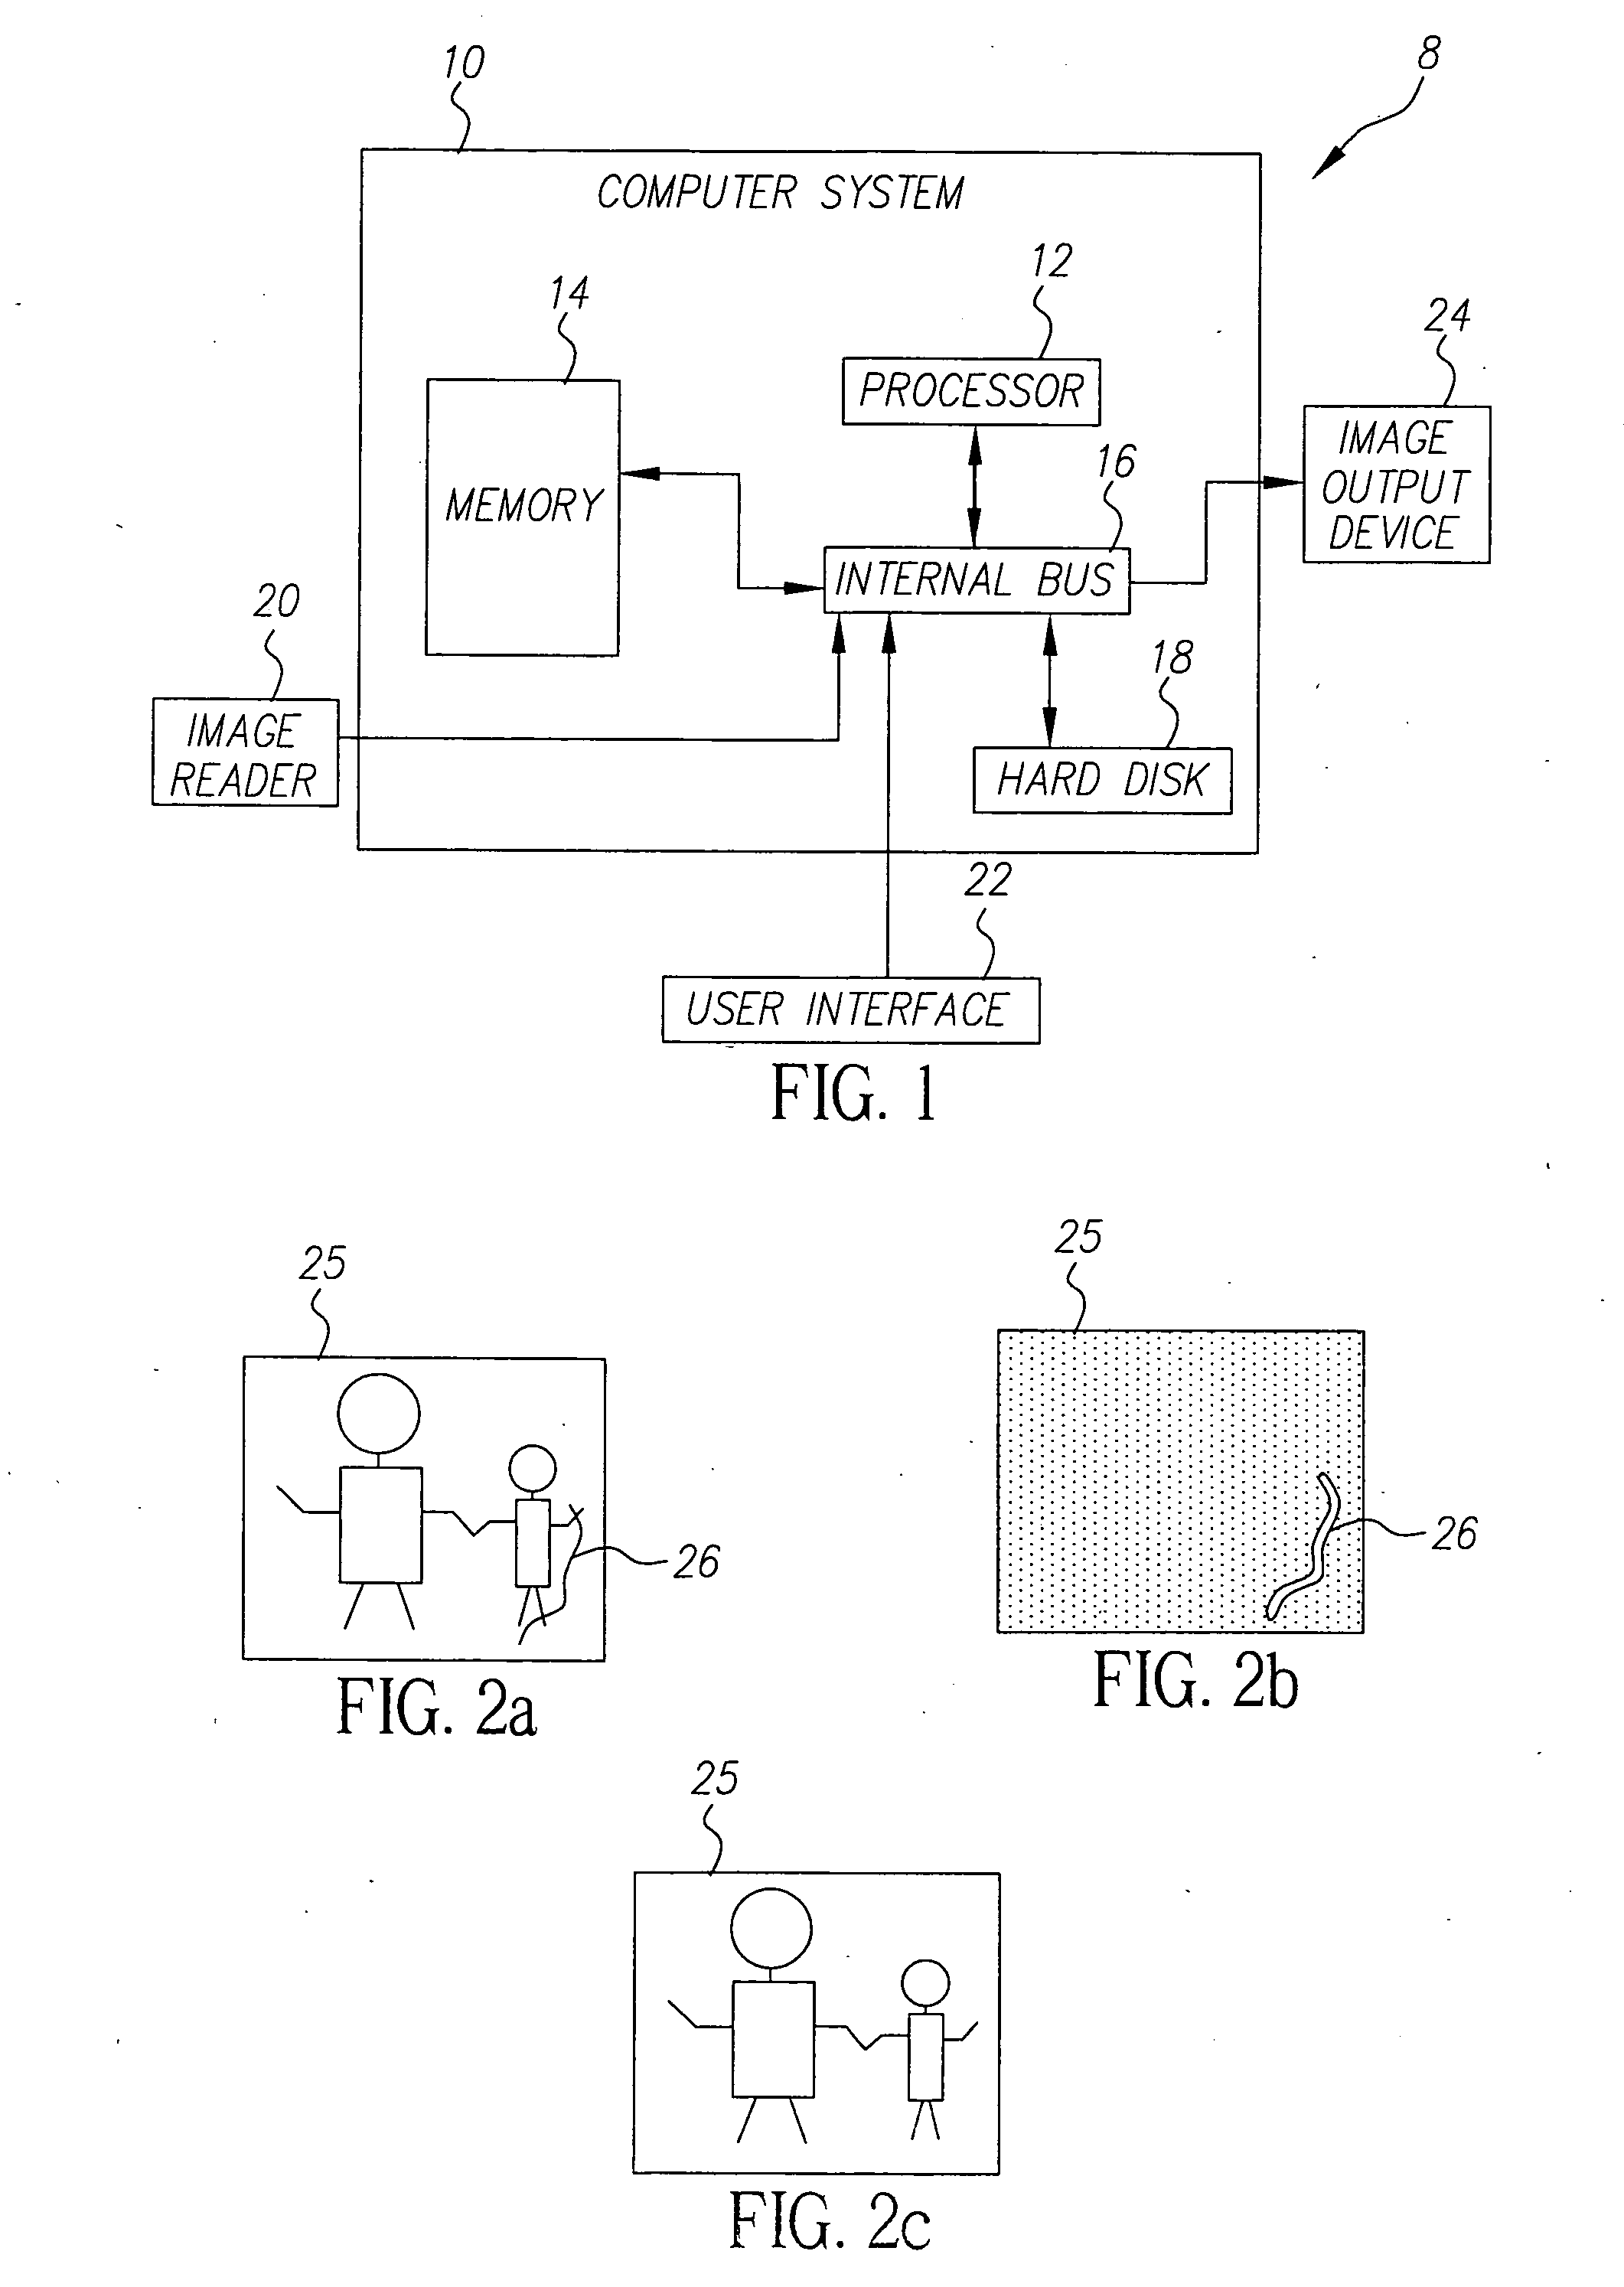 Method and apparatus for digital processing of images